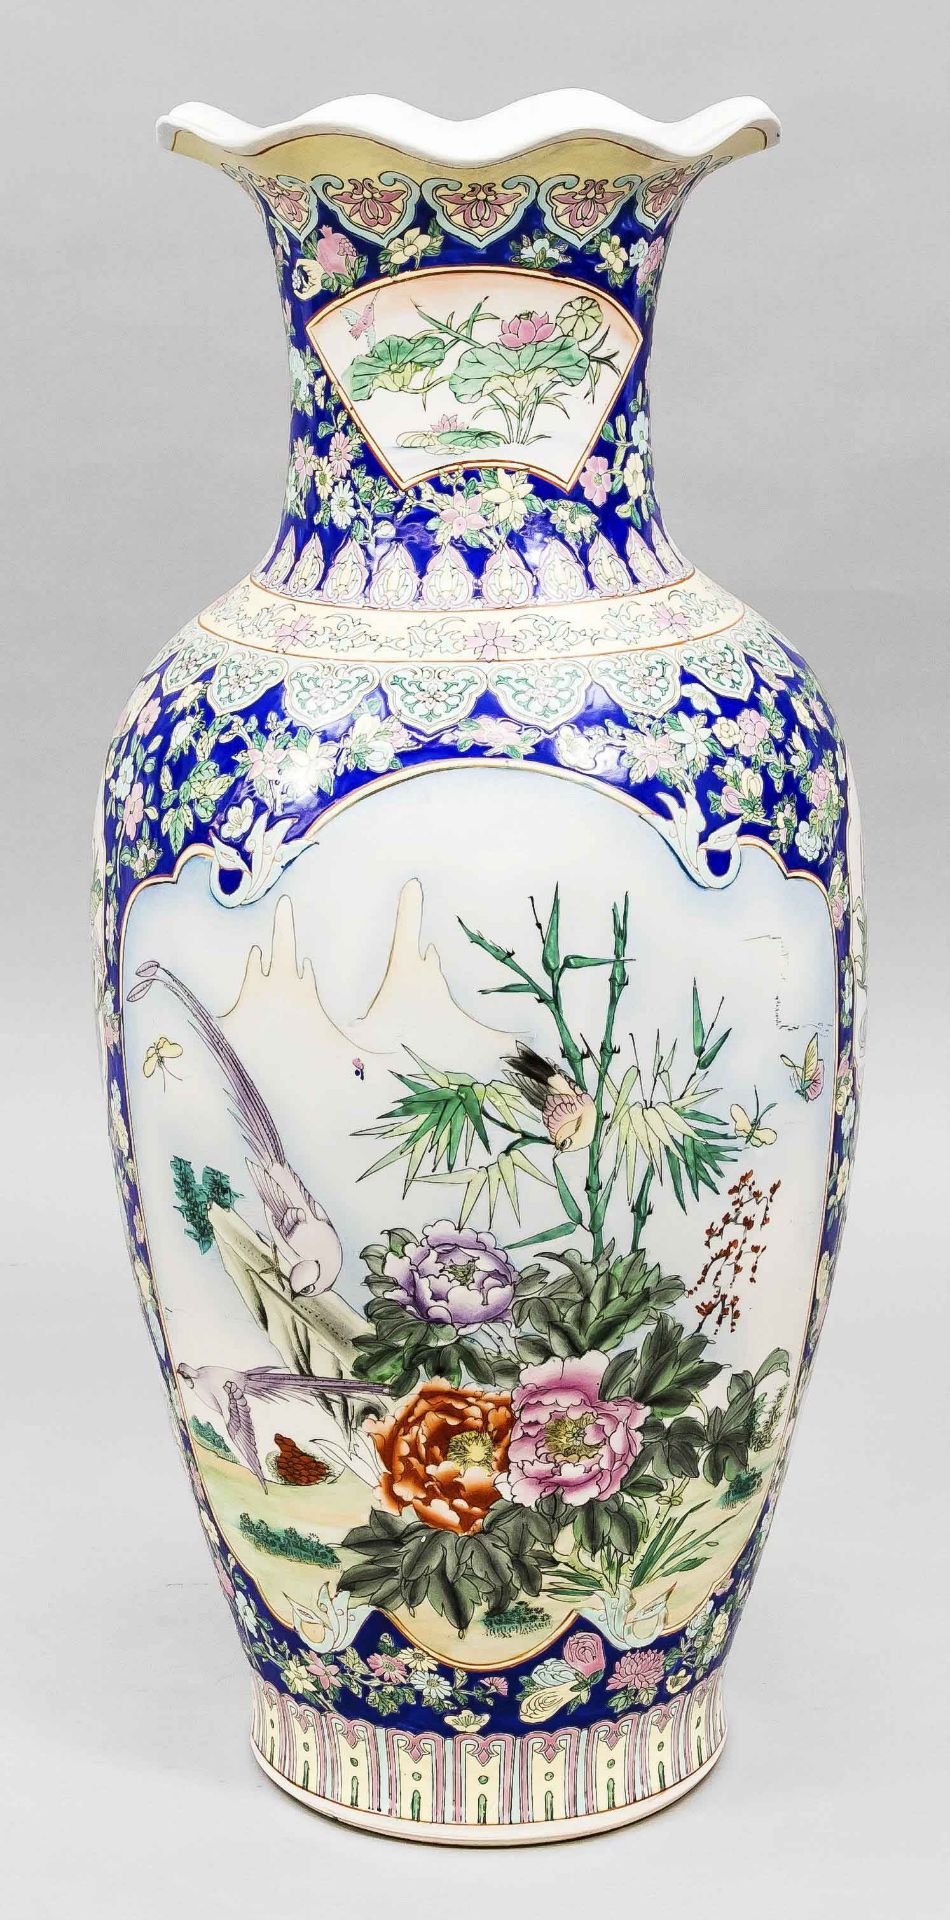 Famille rose floor vase, China, 20th c. Body divided into two large and four smaller cartouches with - Image 2 of 2